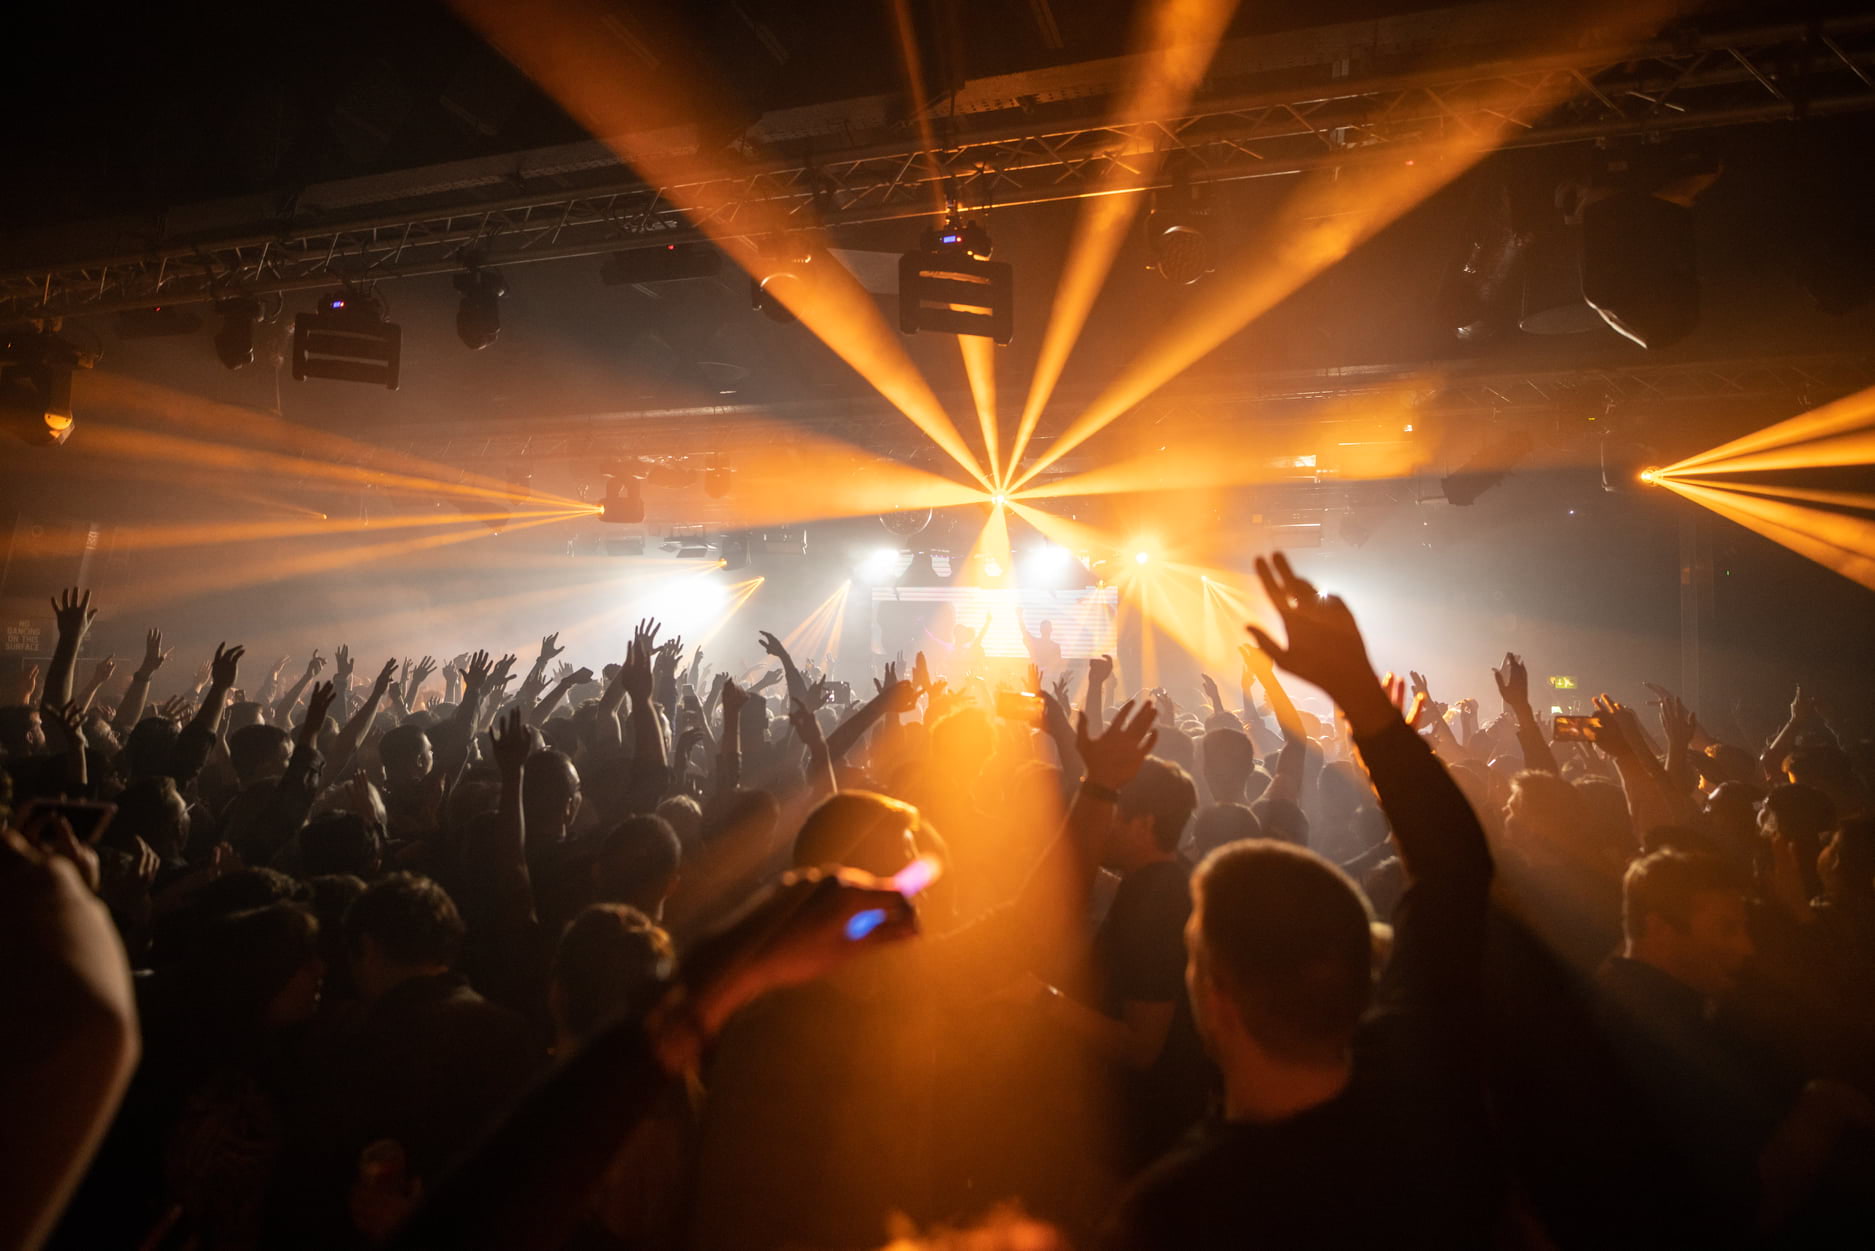 Ministry of Sound – A day in London